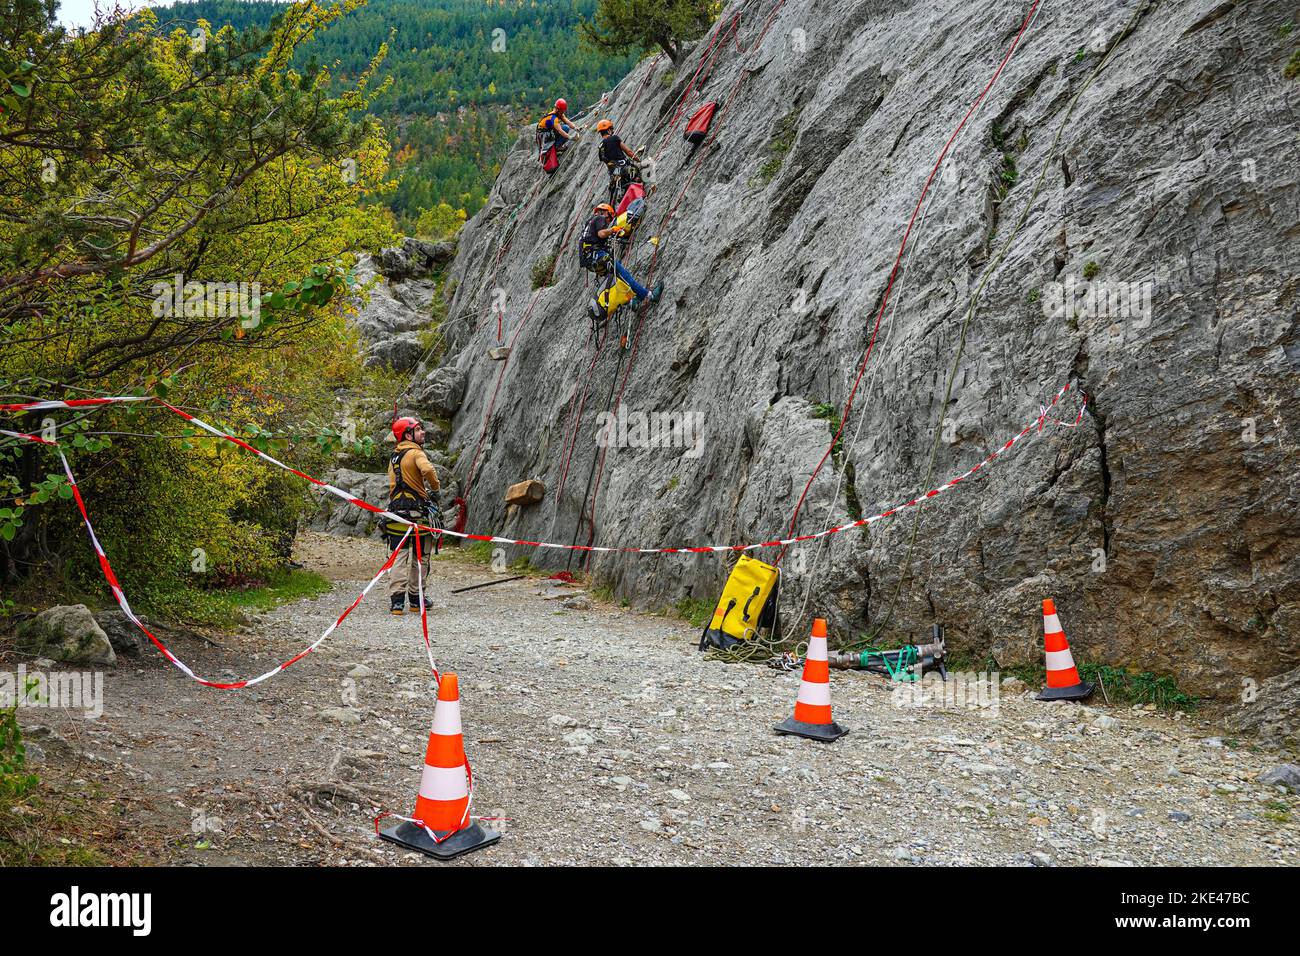 Cavers practising with ropes on a cliff face at Autumn in the Alps Maritimes, French Alps, Alps, France, EU Stock Photo